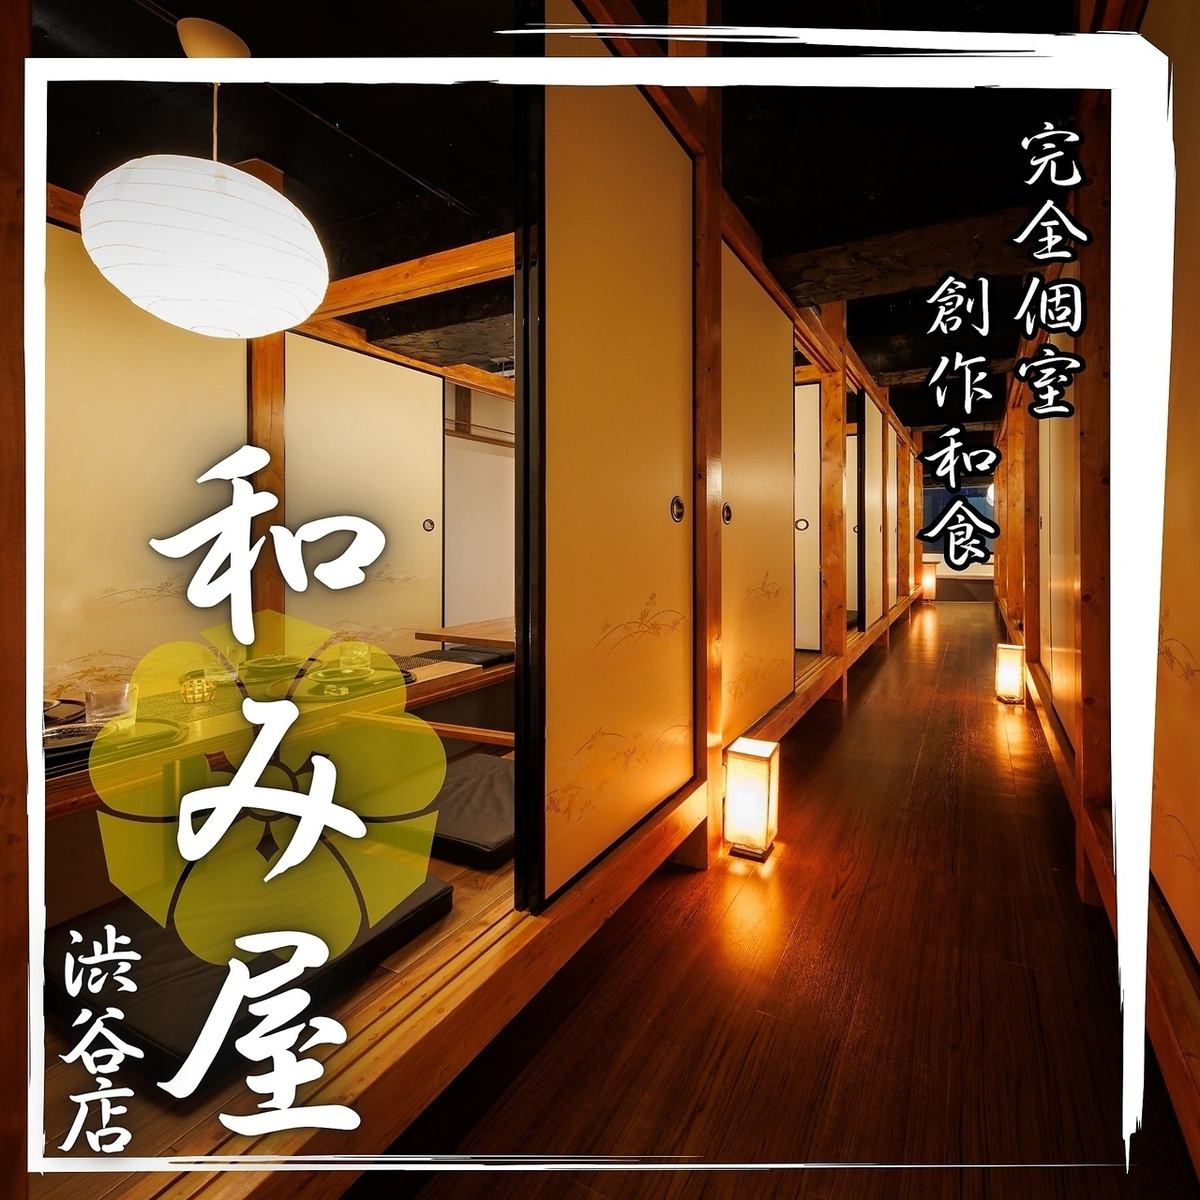 3 minutes walk from Shibuya Station! All-you-can-drink course starts from 3,280 yen! All seats are completely private rooms!